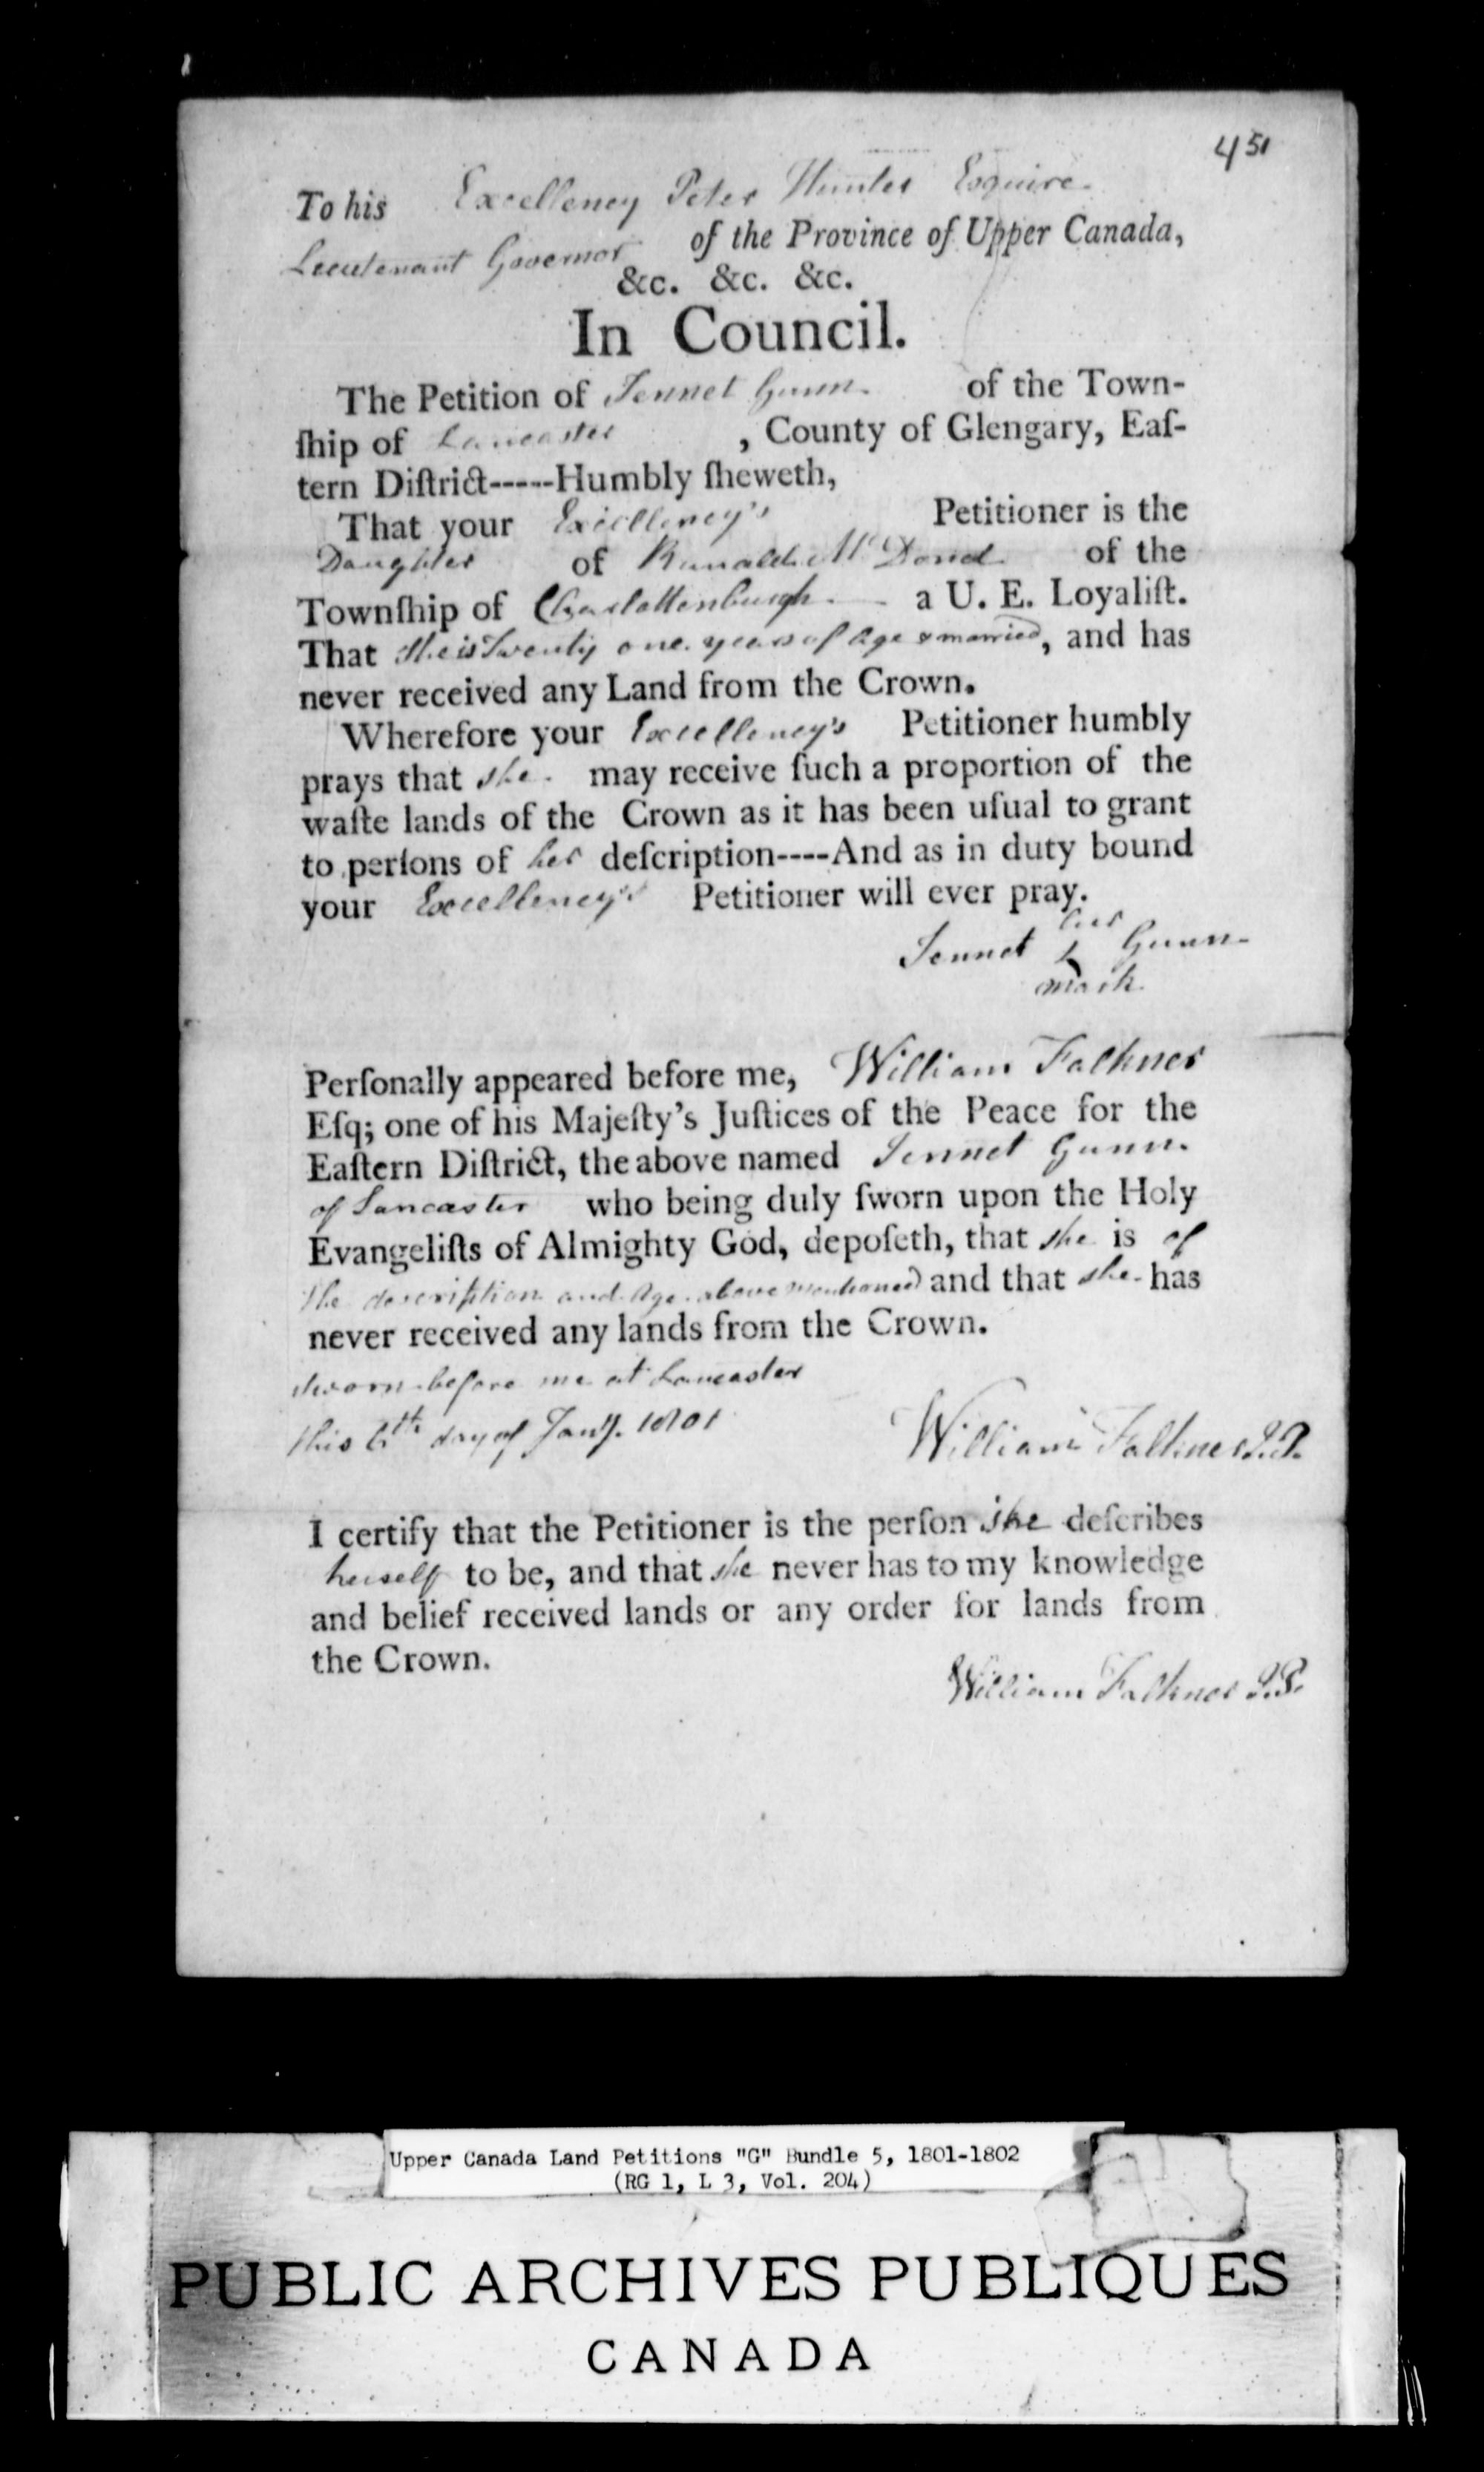 Title: Upper Canada Land Petitions (1763-1865) - Mikan Number: 205131 - Microform: c-2028